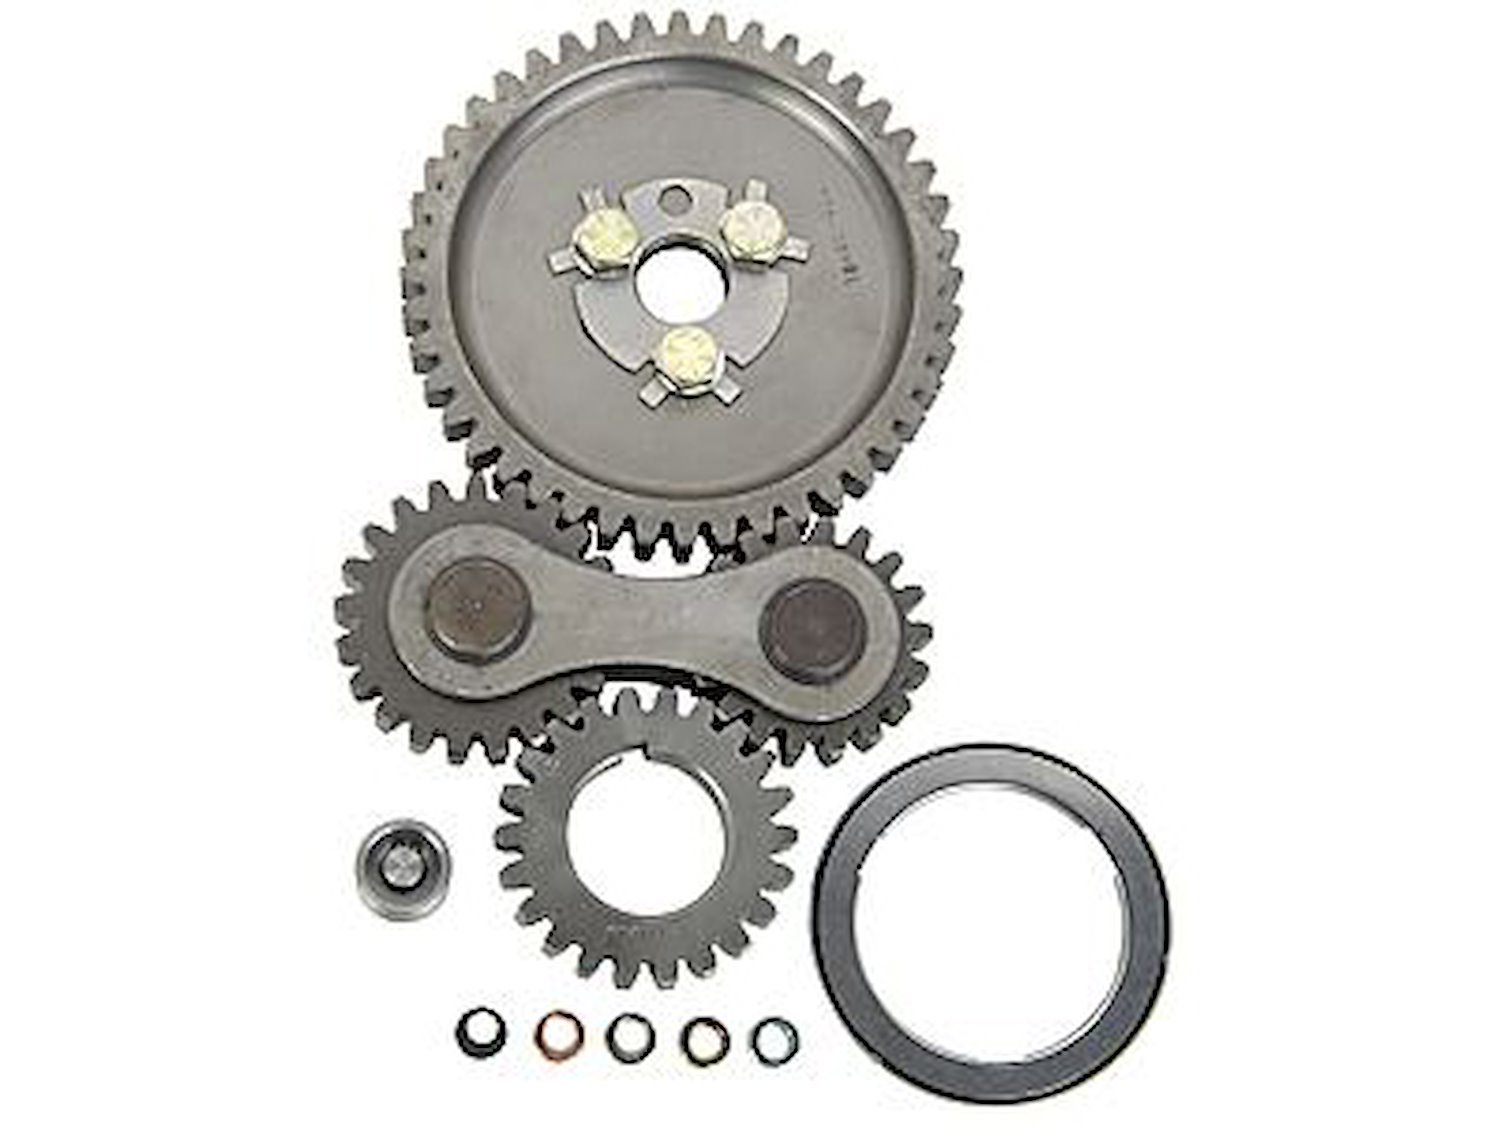 Quieter Performance Gear Drive 1955-92 Small Block Chevy 265-400